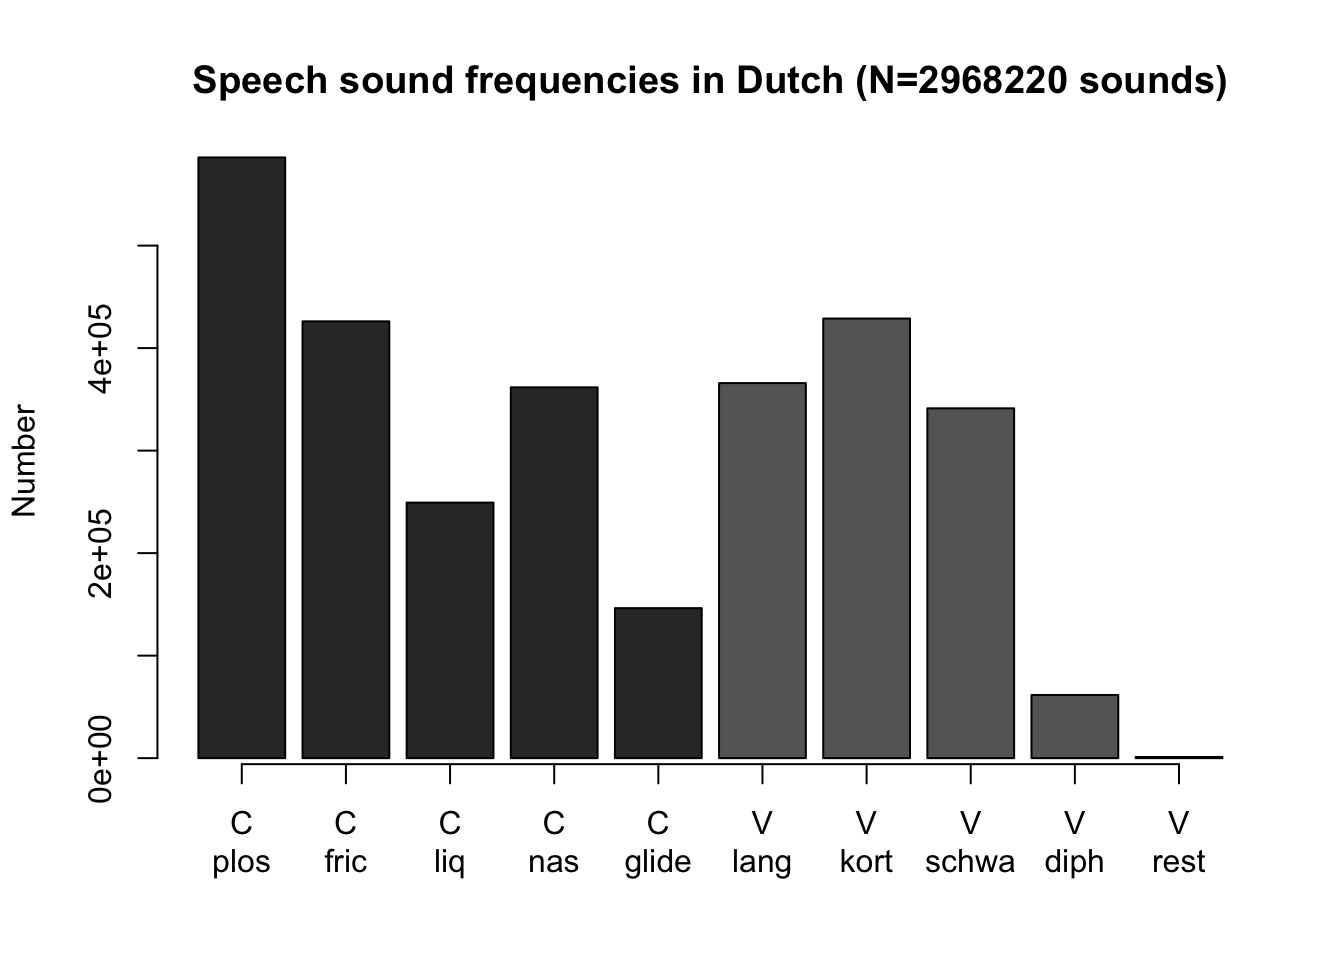 Bar chart of the frequency distribution of phonological class of speech sounds in the Corpus of Spoken Dutch (C=consonant, V=vowel).